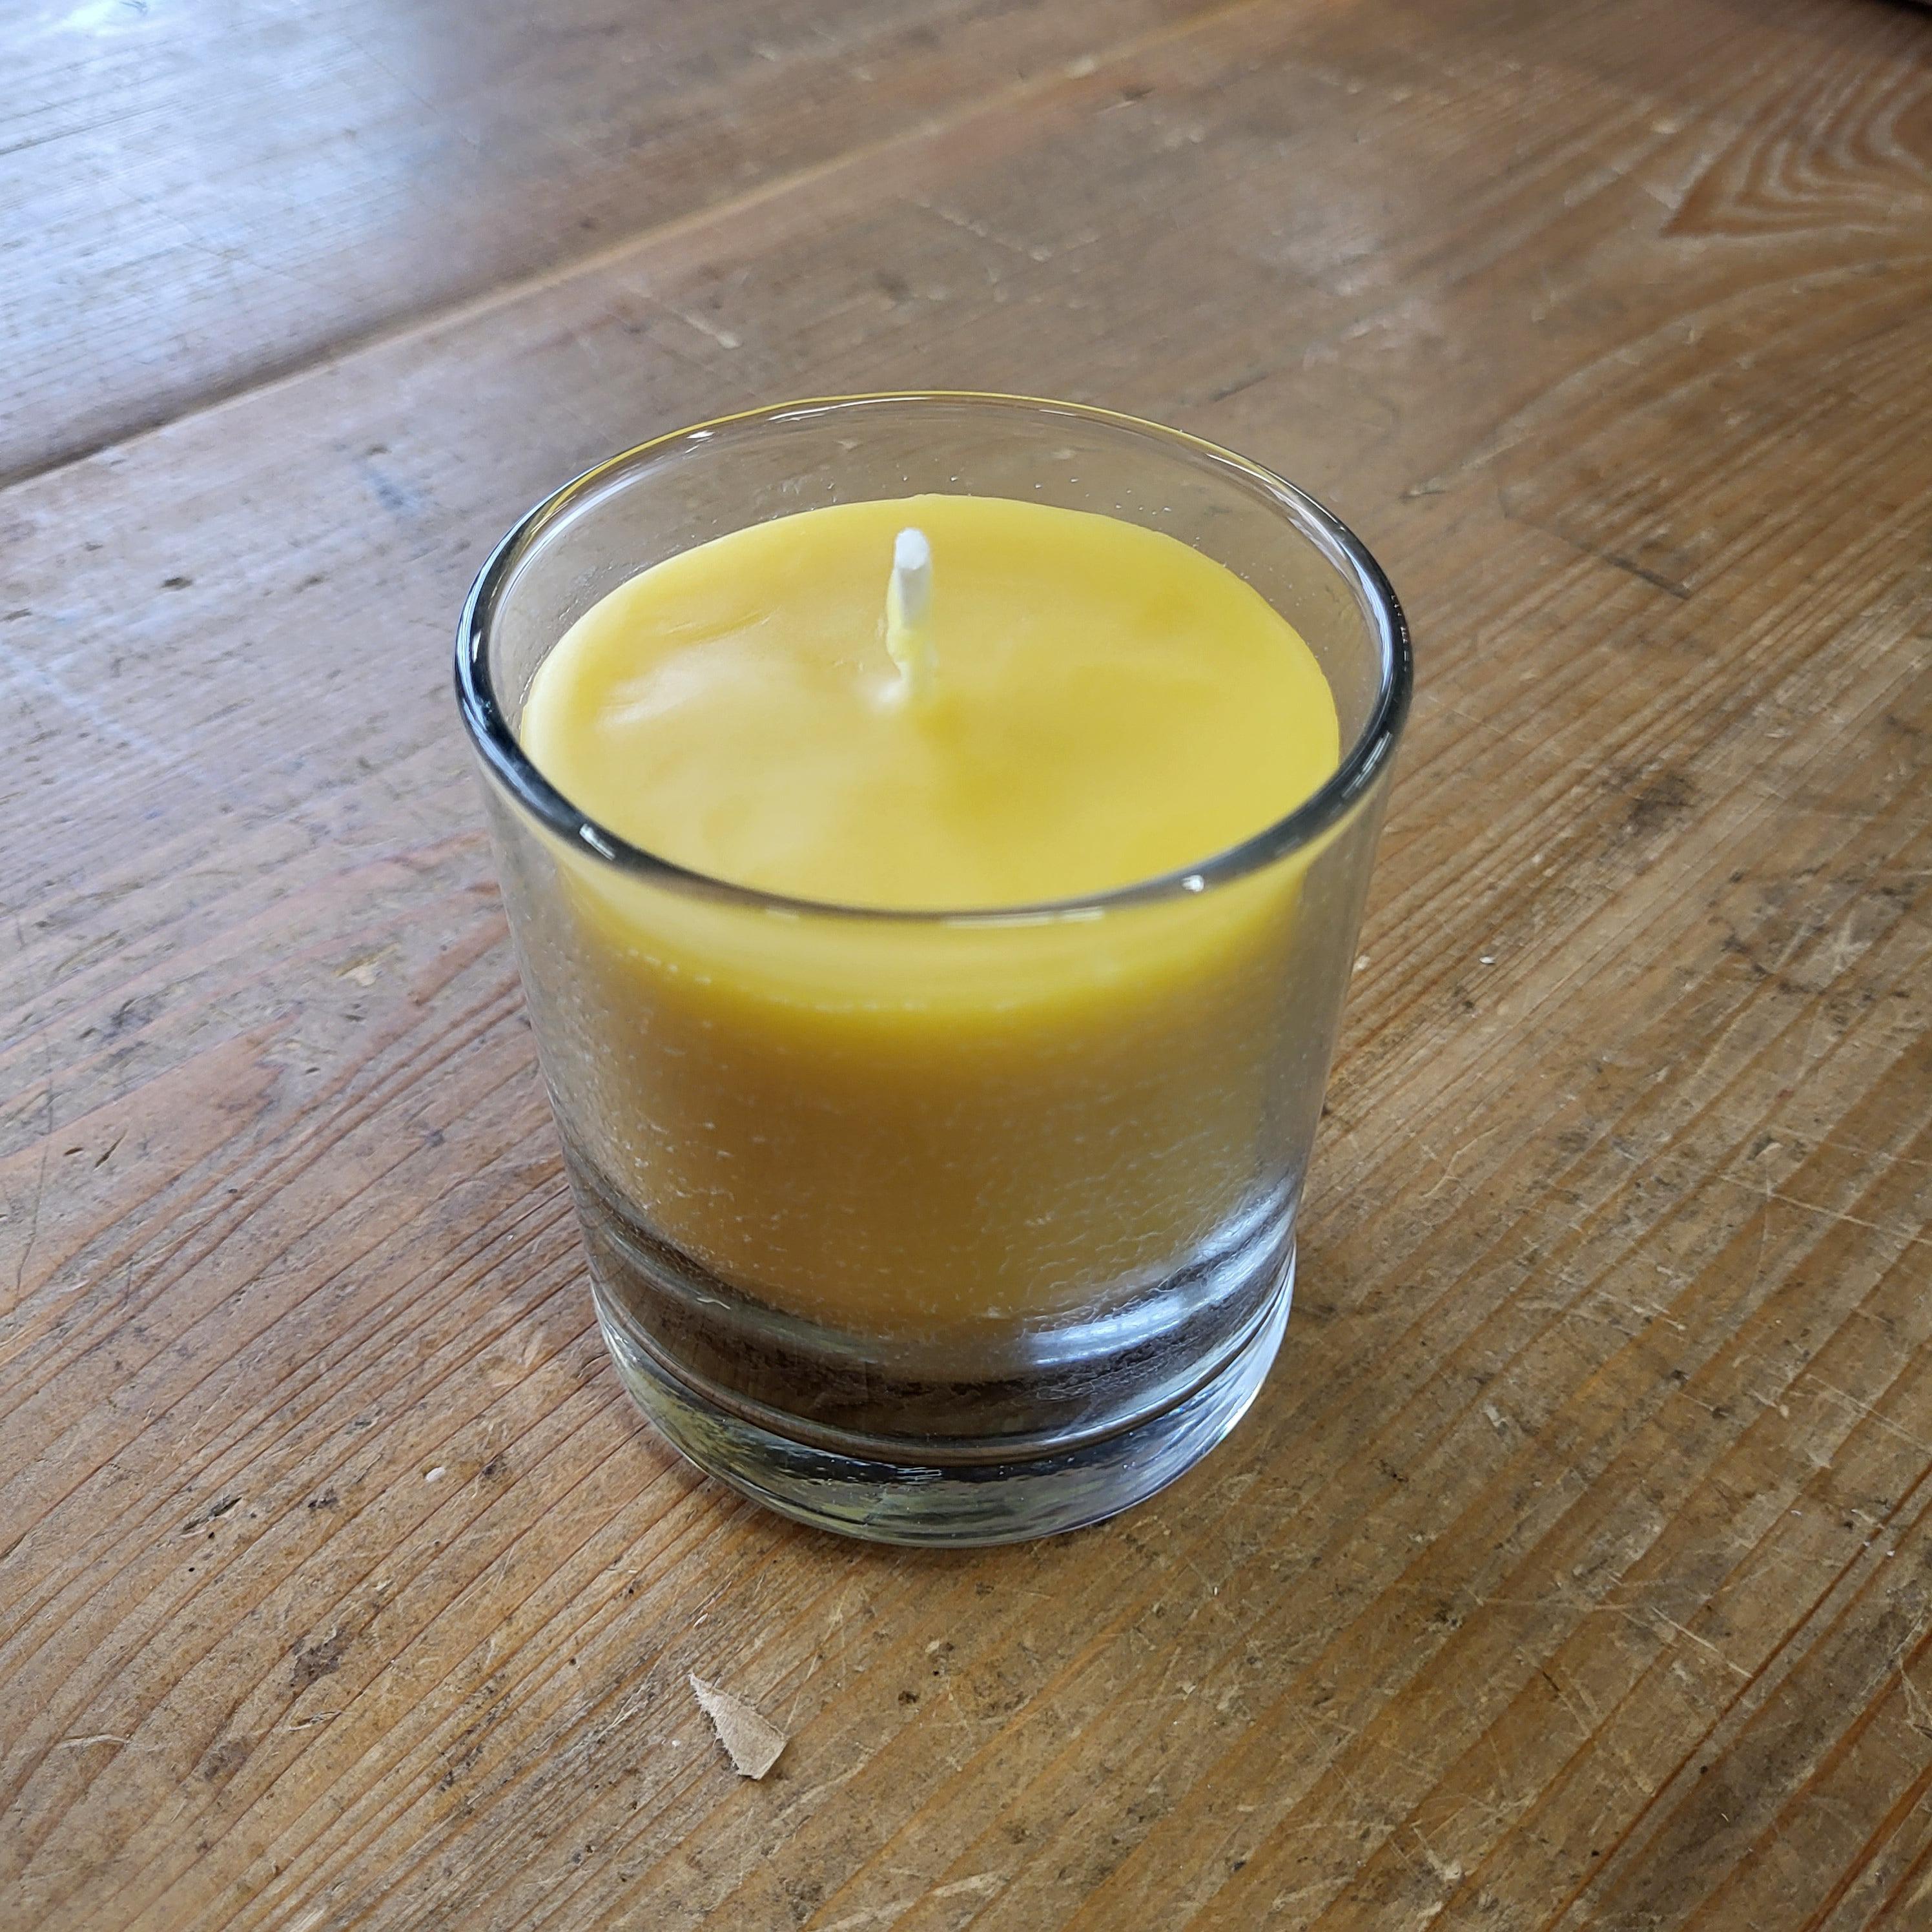 100% Pure Beeswax Candles – Foxhound Bee Company